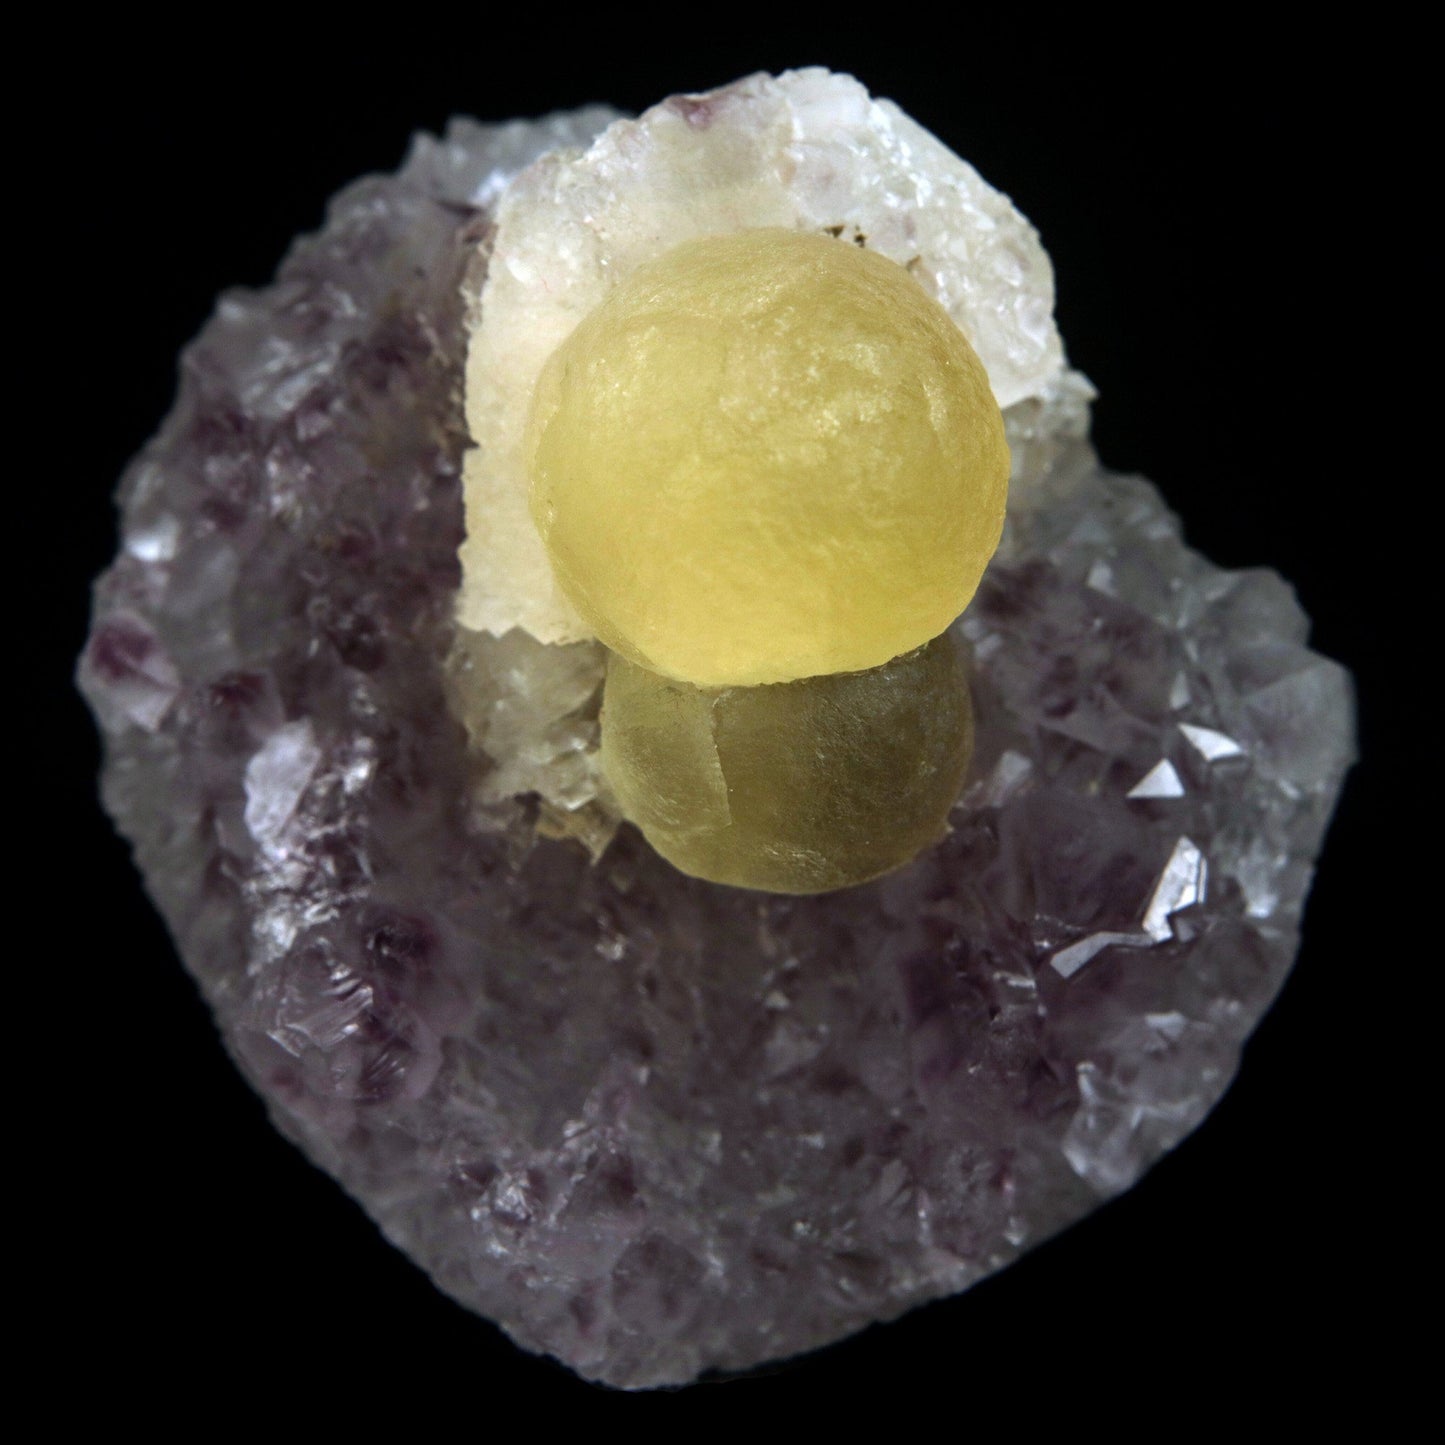 Fluorite Botryoidal on Amethyst Natural Mineral Specimen # B 4888  https://www.superbminerals.us/products/fluorite-botryoidal-on-amethyst-natural-mineral-specimen-b-4888  Features: An extraordinarily botryoidal "ball" of Fluorite is perched atop an exceptionally rich purple coloured Amethyst on Chalcedony and host rock matrix, creating an unusually beautiful specimen